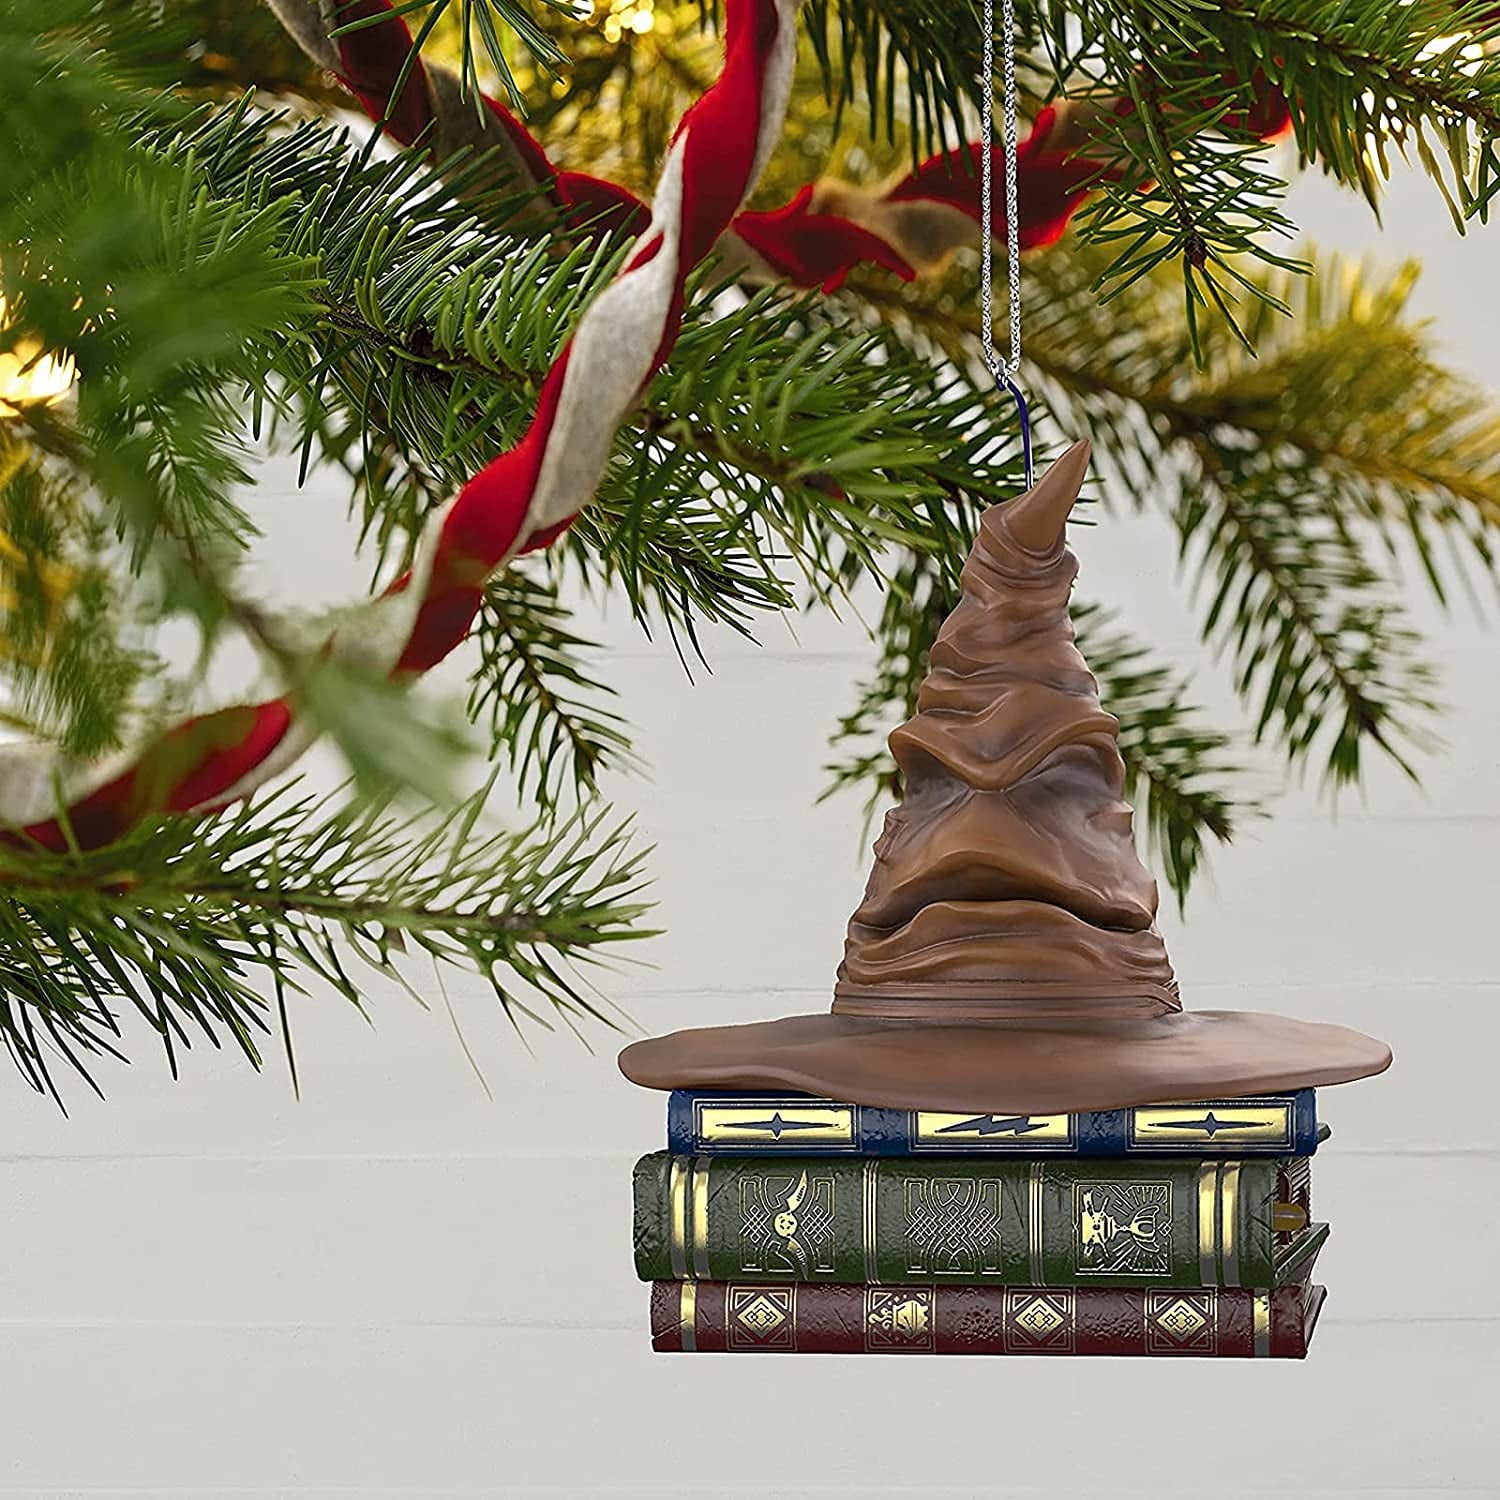 Details about   Pottery Barn Harry Potter Golden Snitch Ornament Christmas Tree Decor PBT 